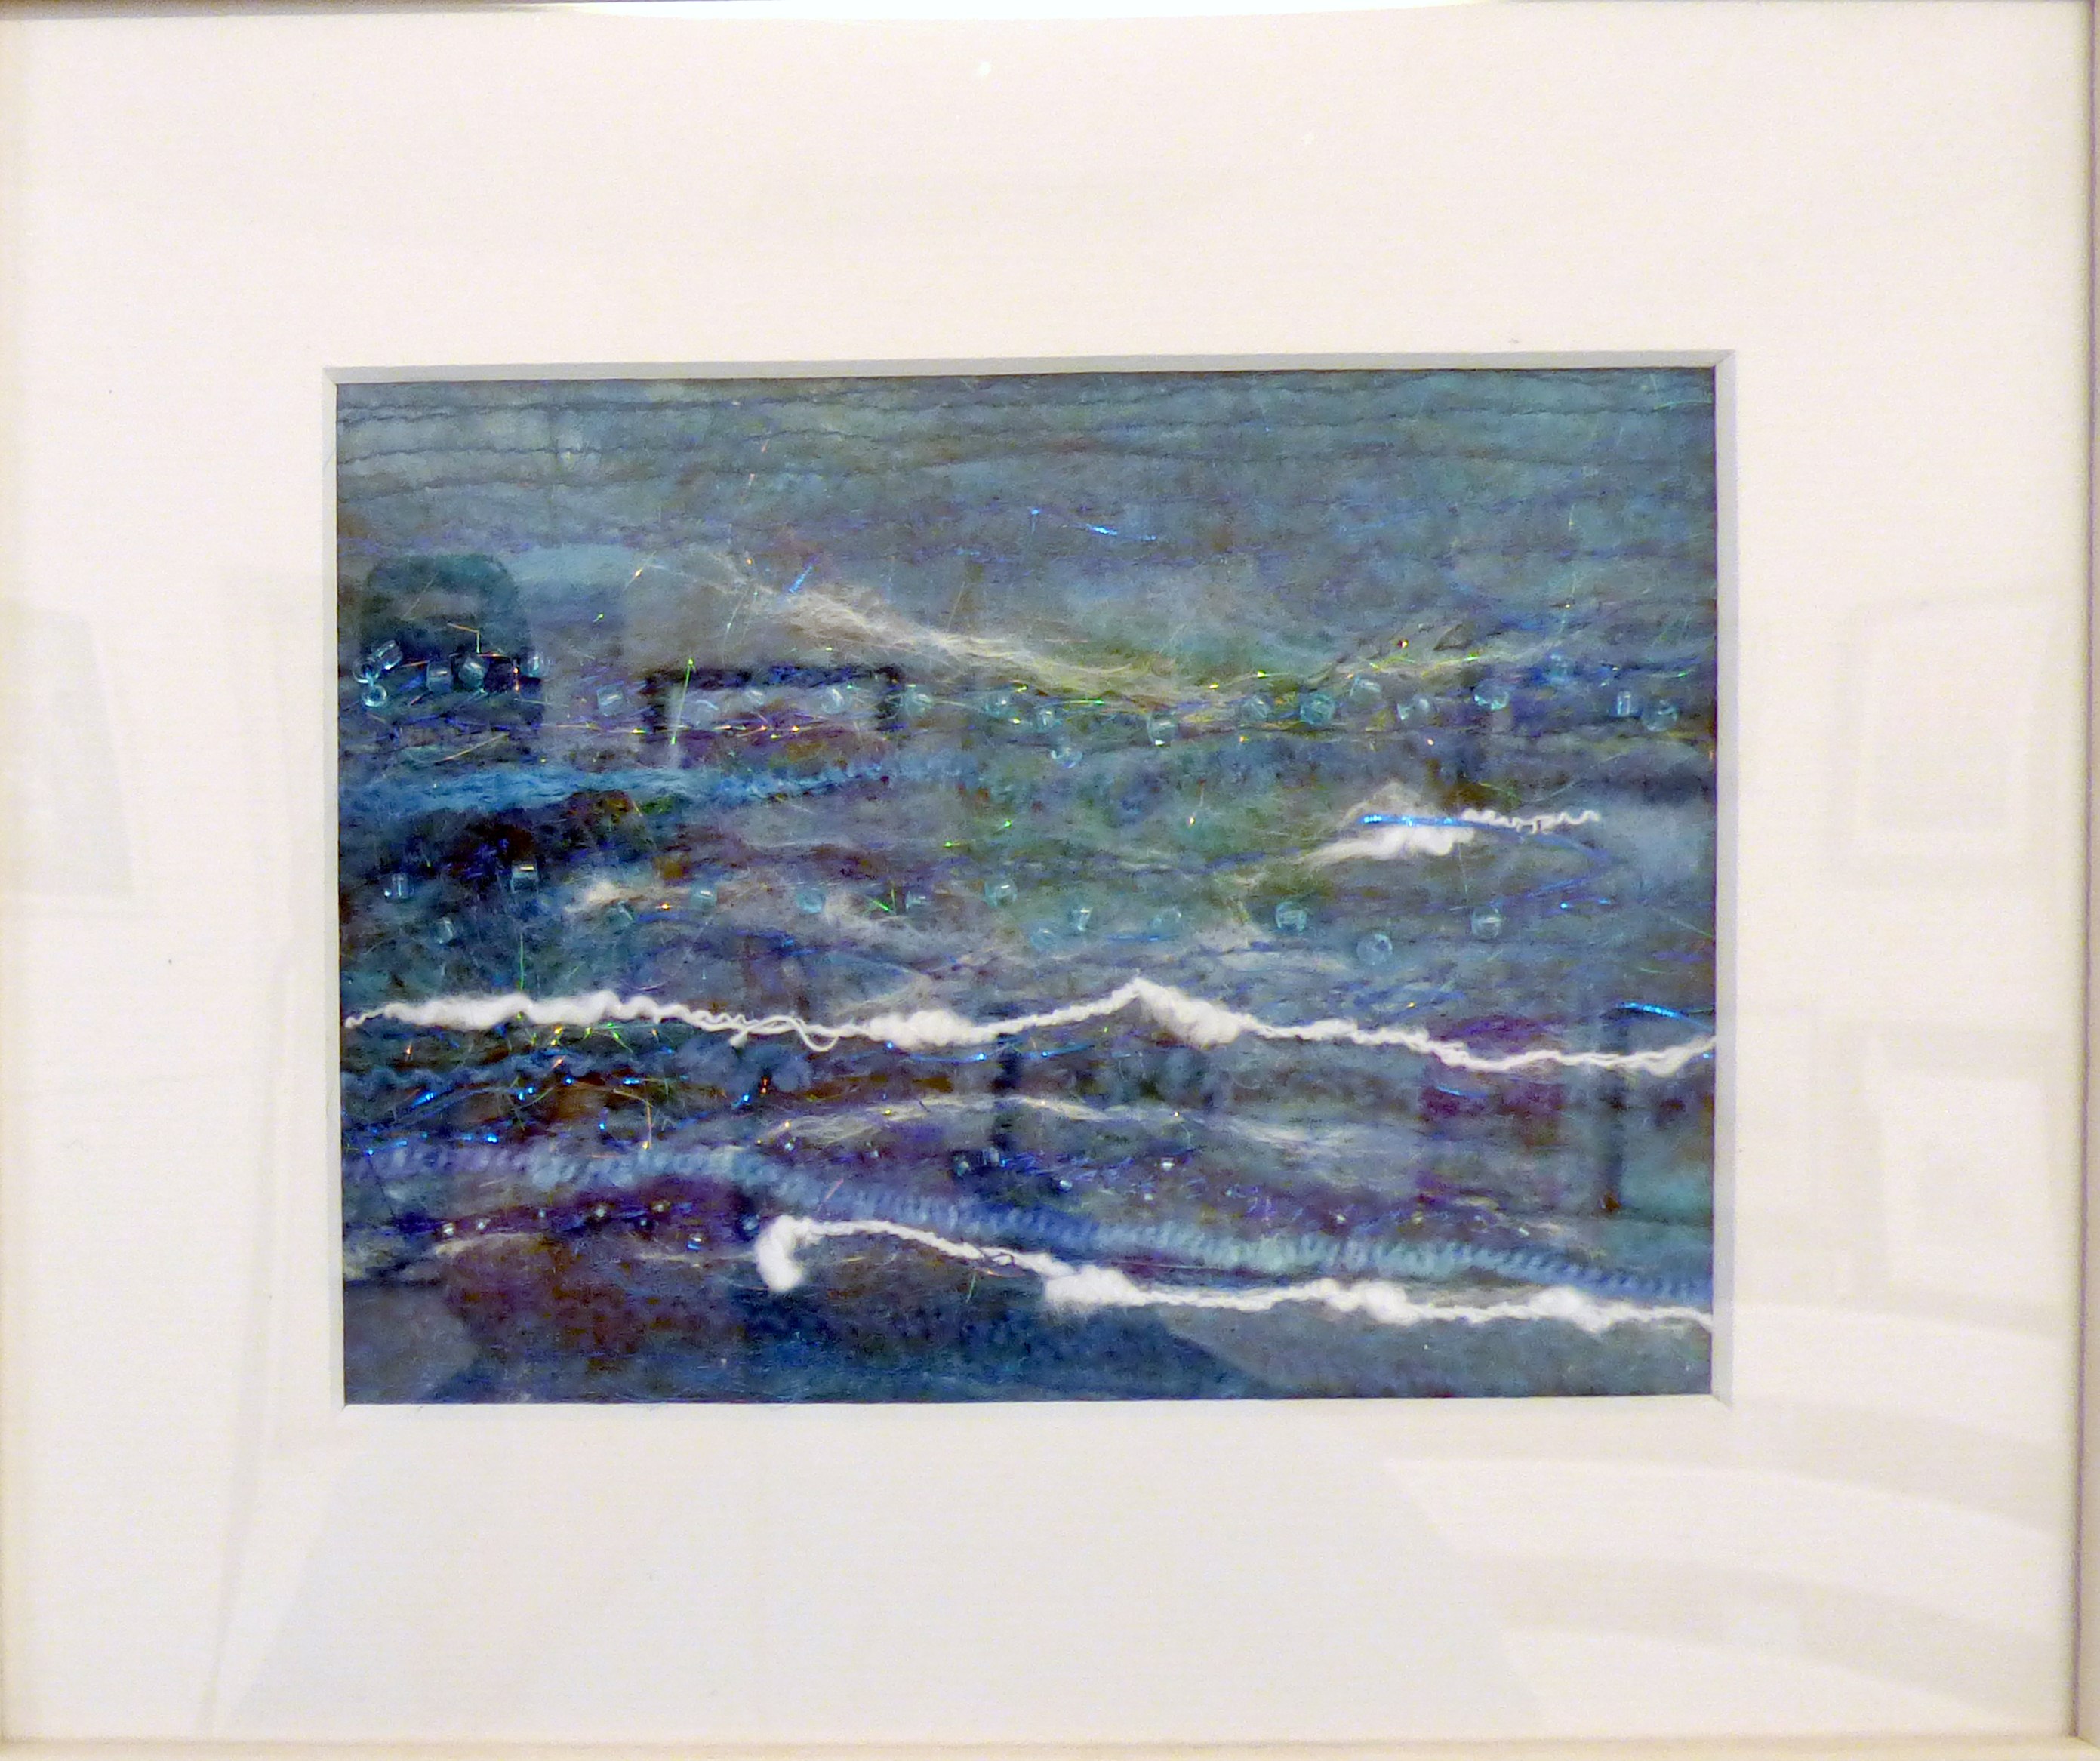 LA MER by Joan Norton, free machine stitching on a hand felted background, ConText group 2018